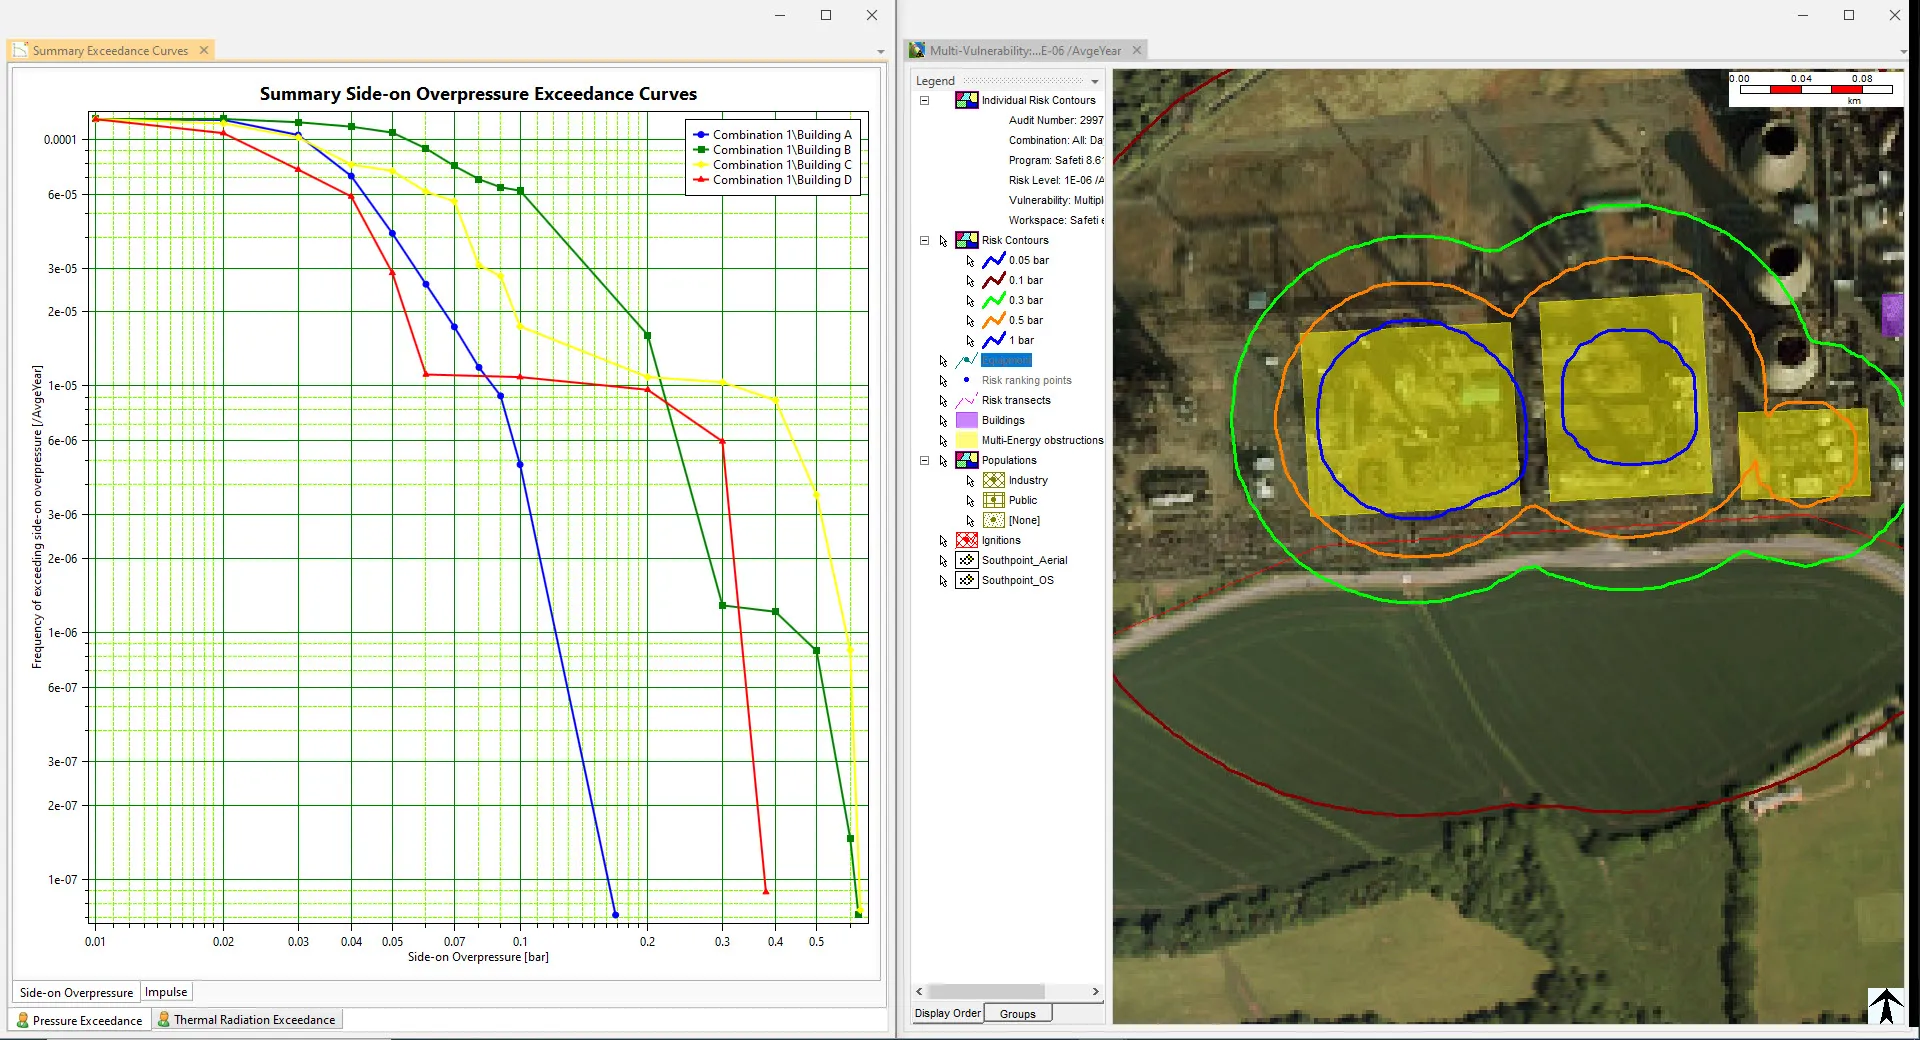 Screenshot from Safeti software, showing overpressure exceedance results in graphical and map views